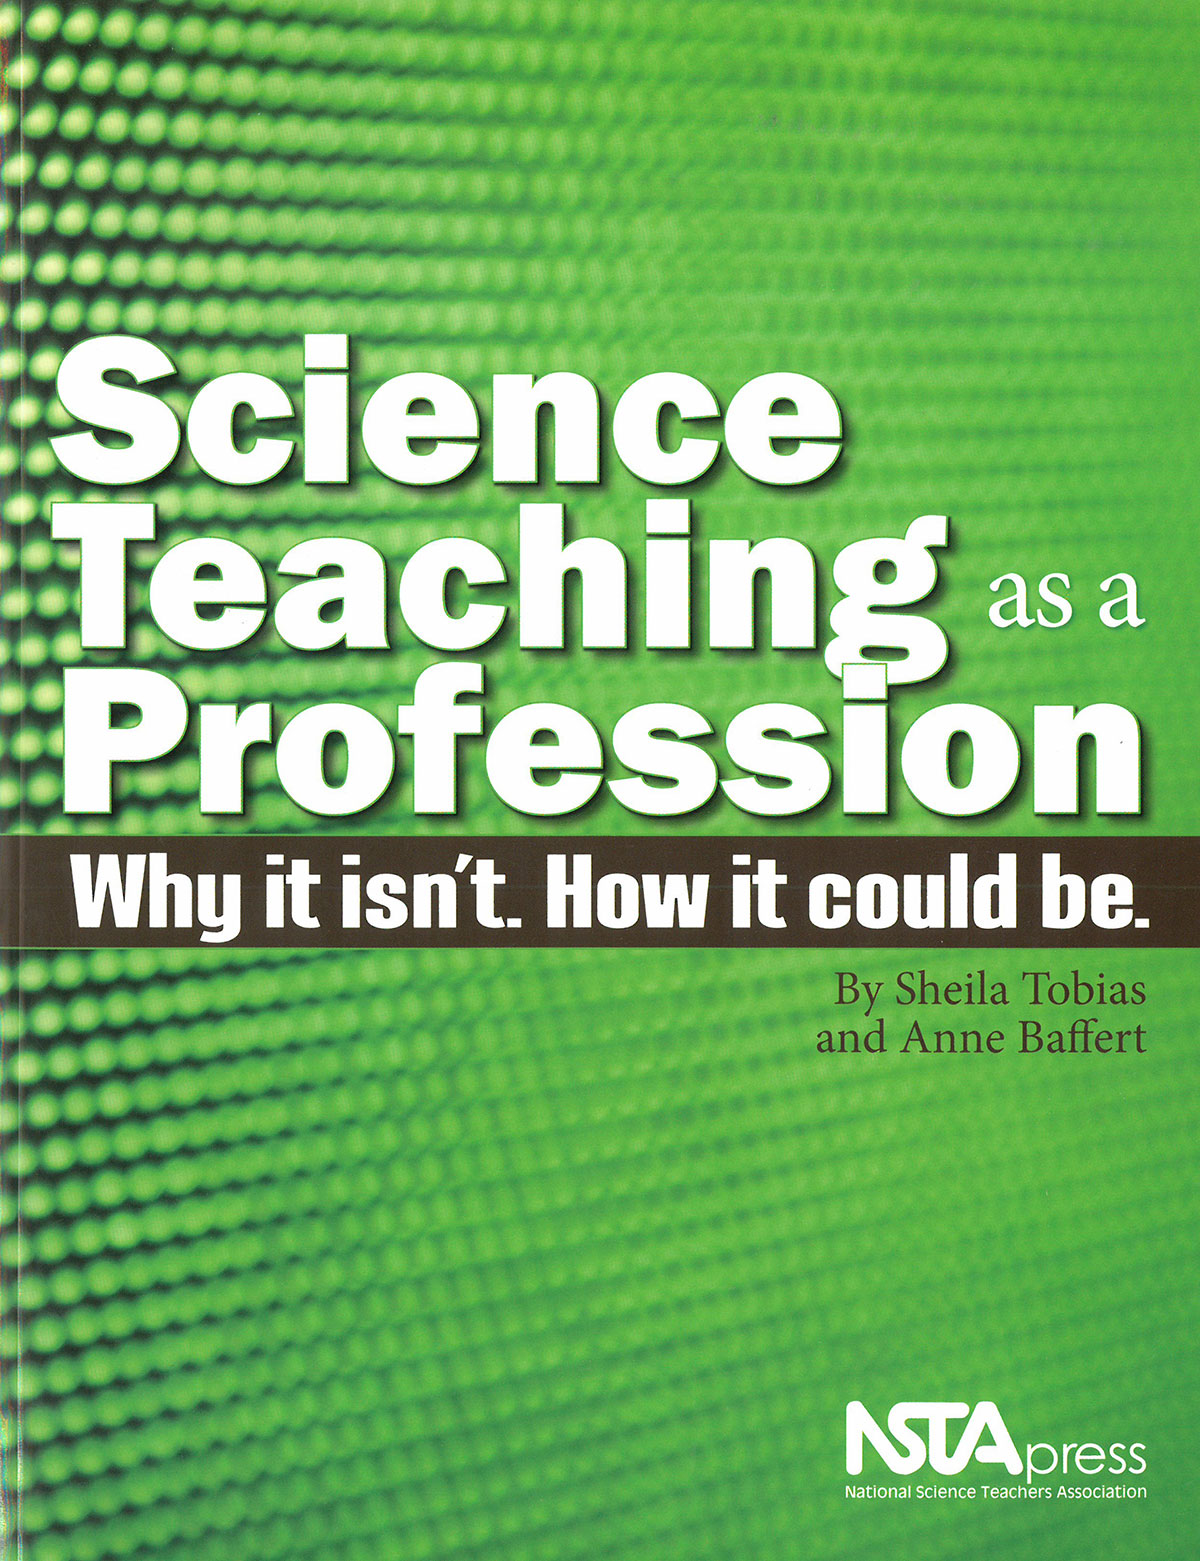 Science Teaching as a Profession: Why It Isn't, How It Could Be